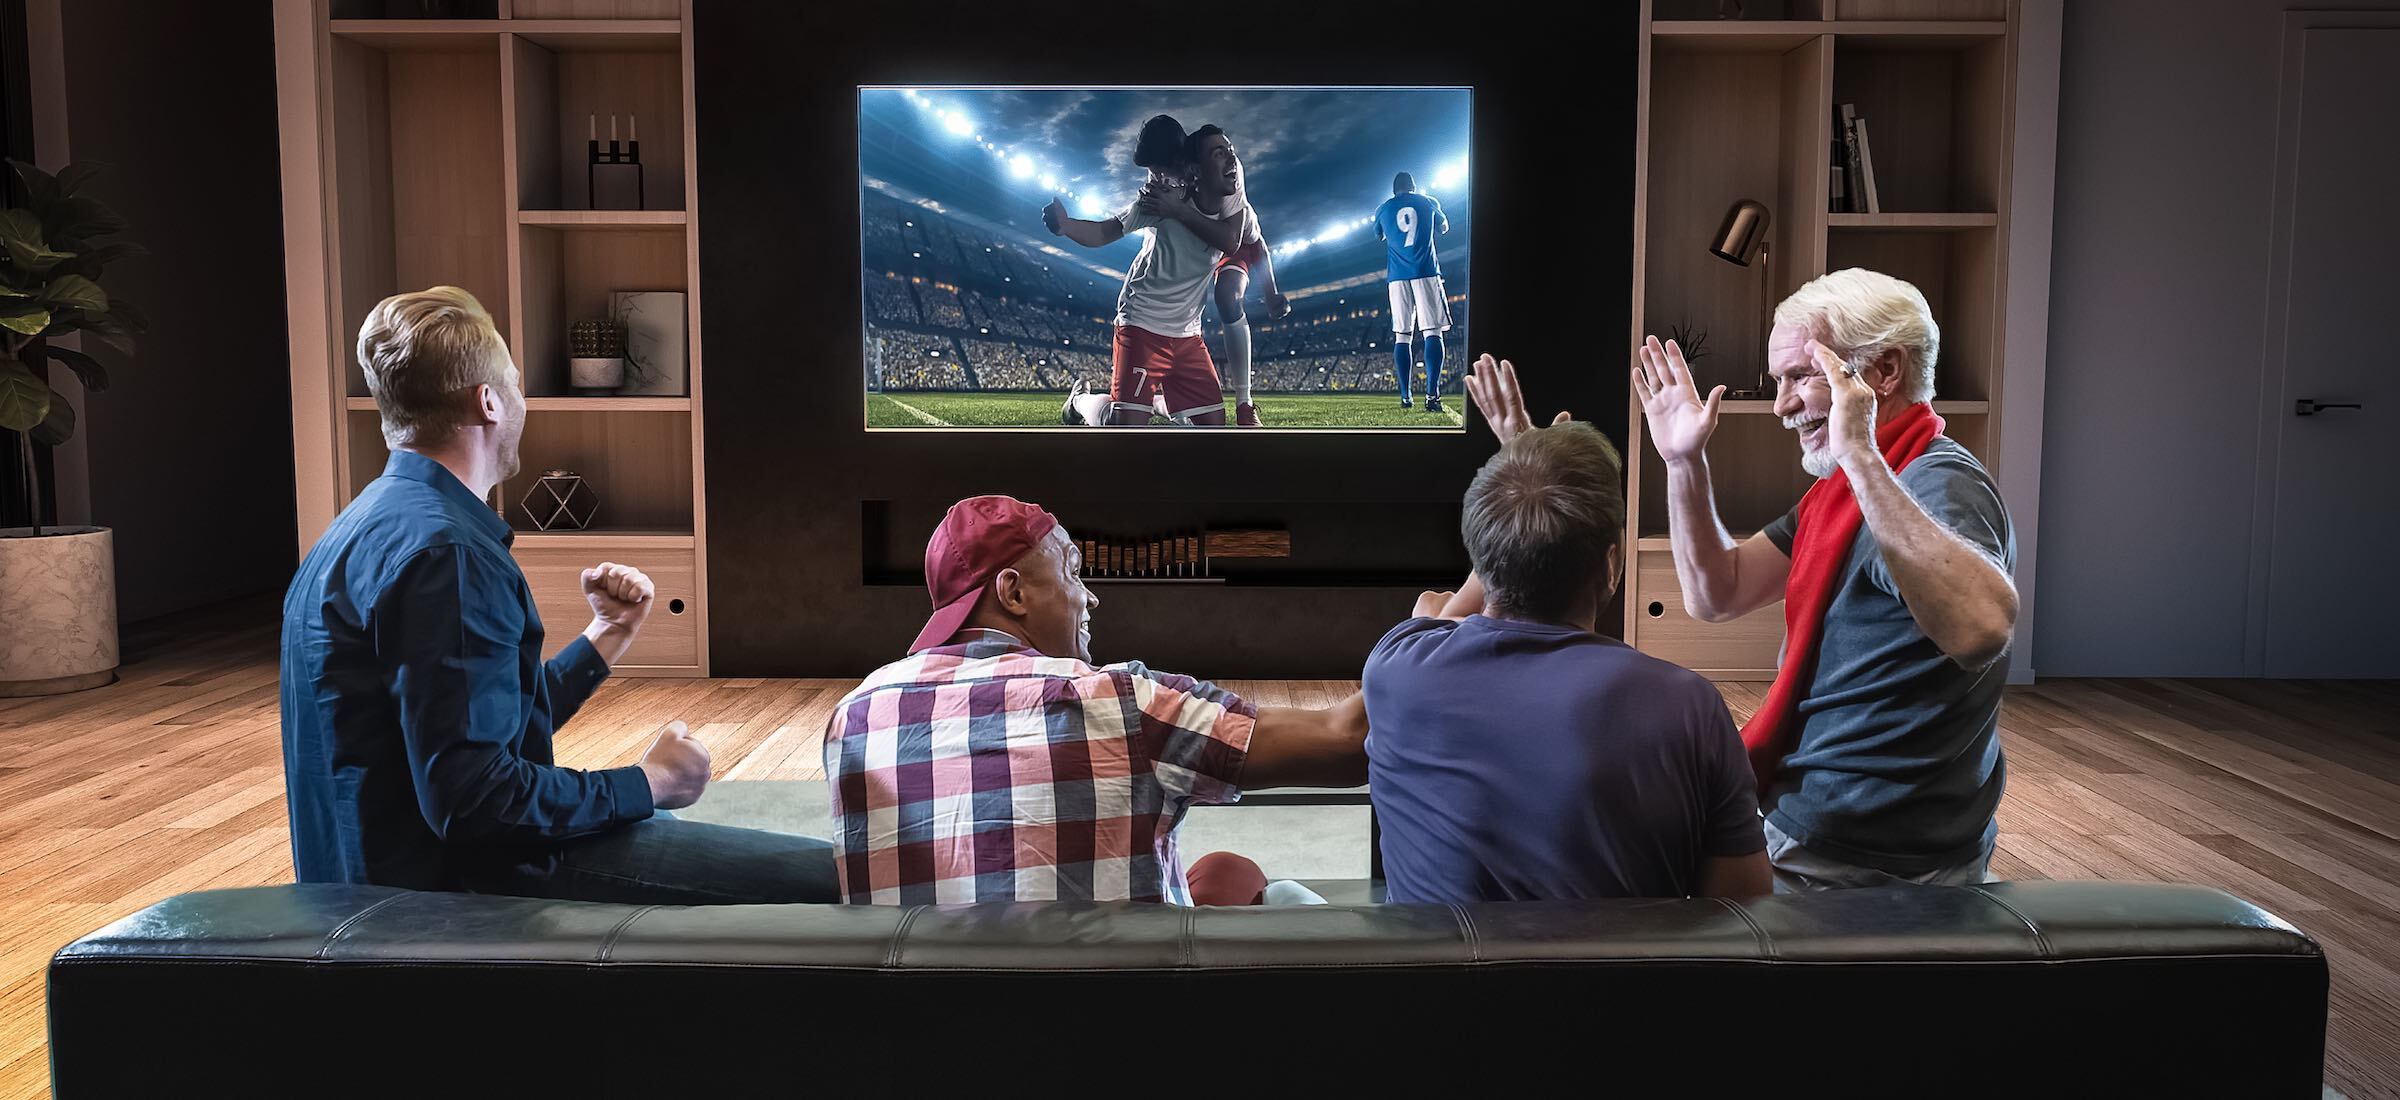 Group of fans are watching a soccer moment on the TV and celebrating a goal, sitting on the couch in the living room. The living room is made in 3D.